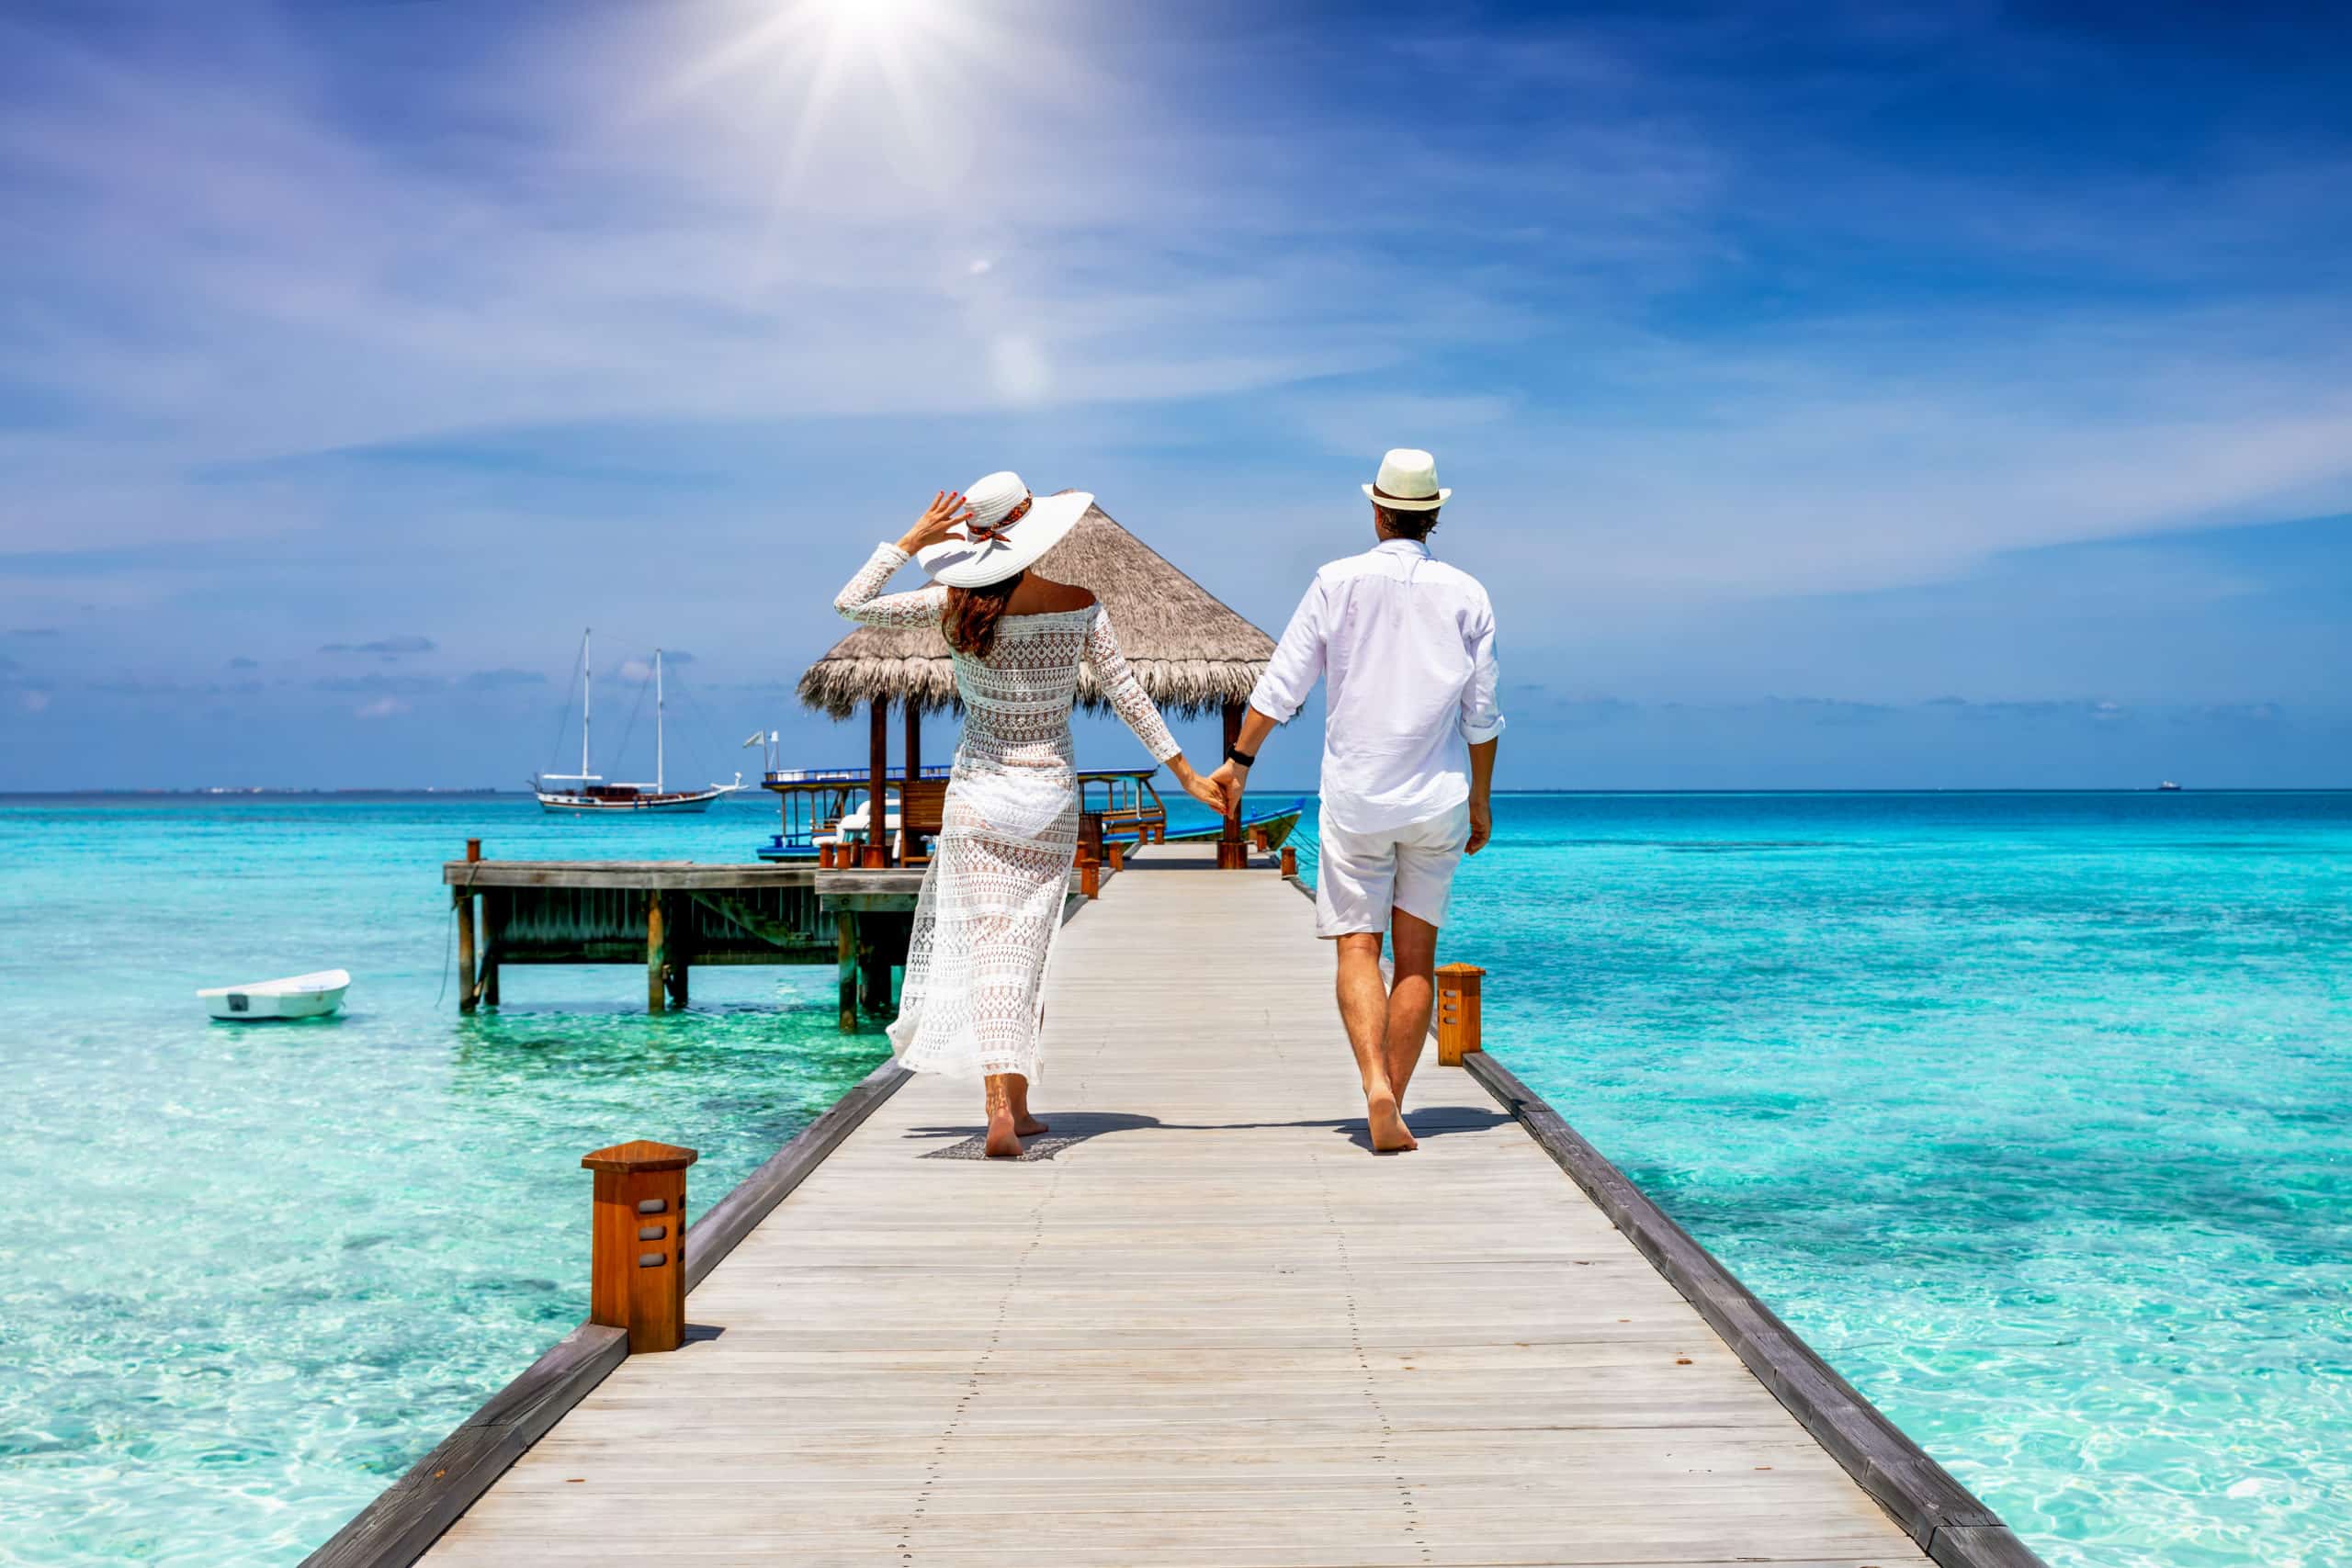 Honeymoon couple walks down a dock by the ocean in the Maldives